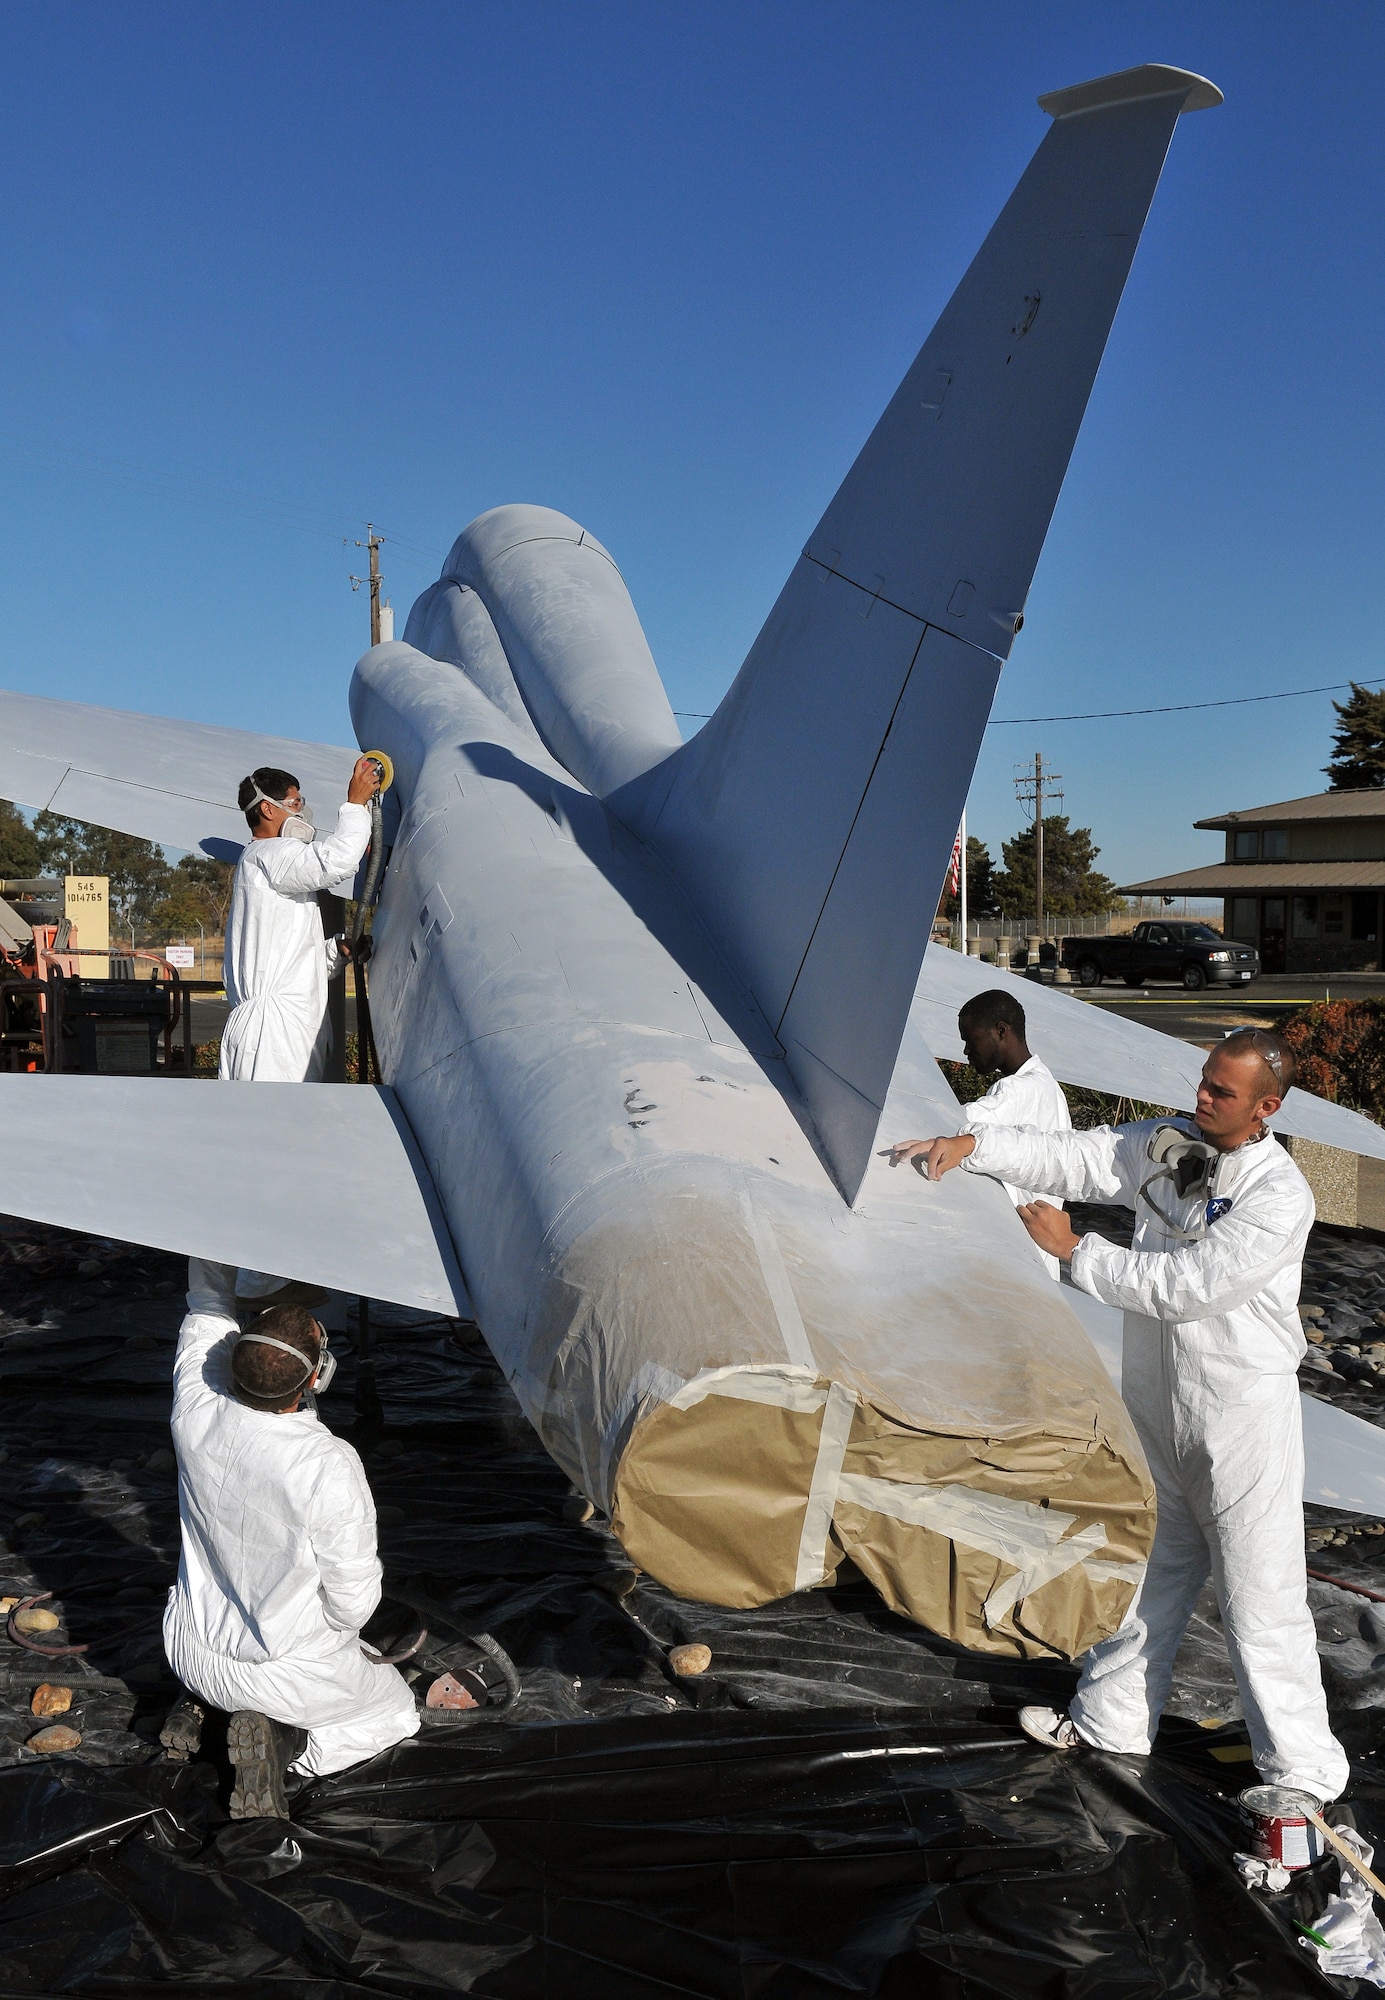 Employees of a Texas-based company restore a T-38 Talon static display at Beale Air Force Base, Calif., Oct. 16, 2012. The Talon static display is located at Beale’s main entrance. (U.S. Air Force photo by Senior Airman Rebeccah Anderson/Released)